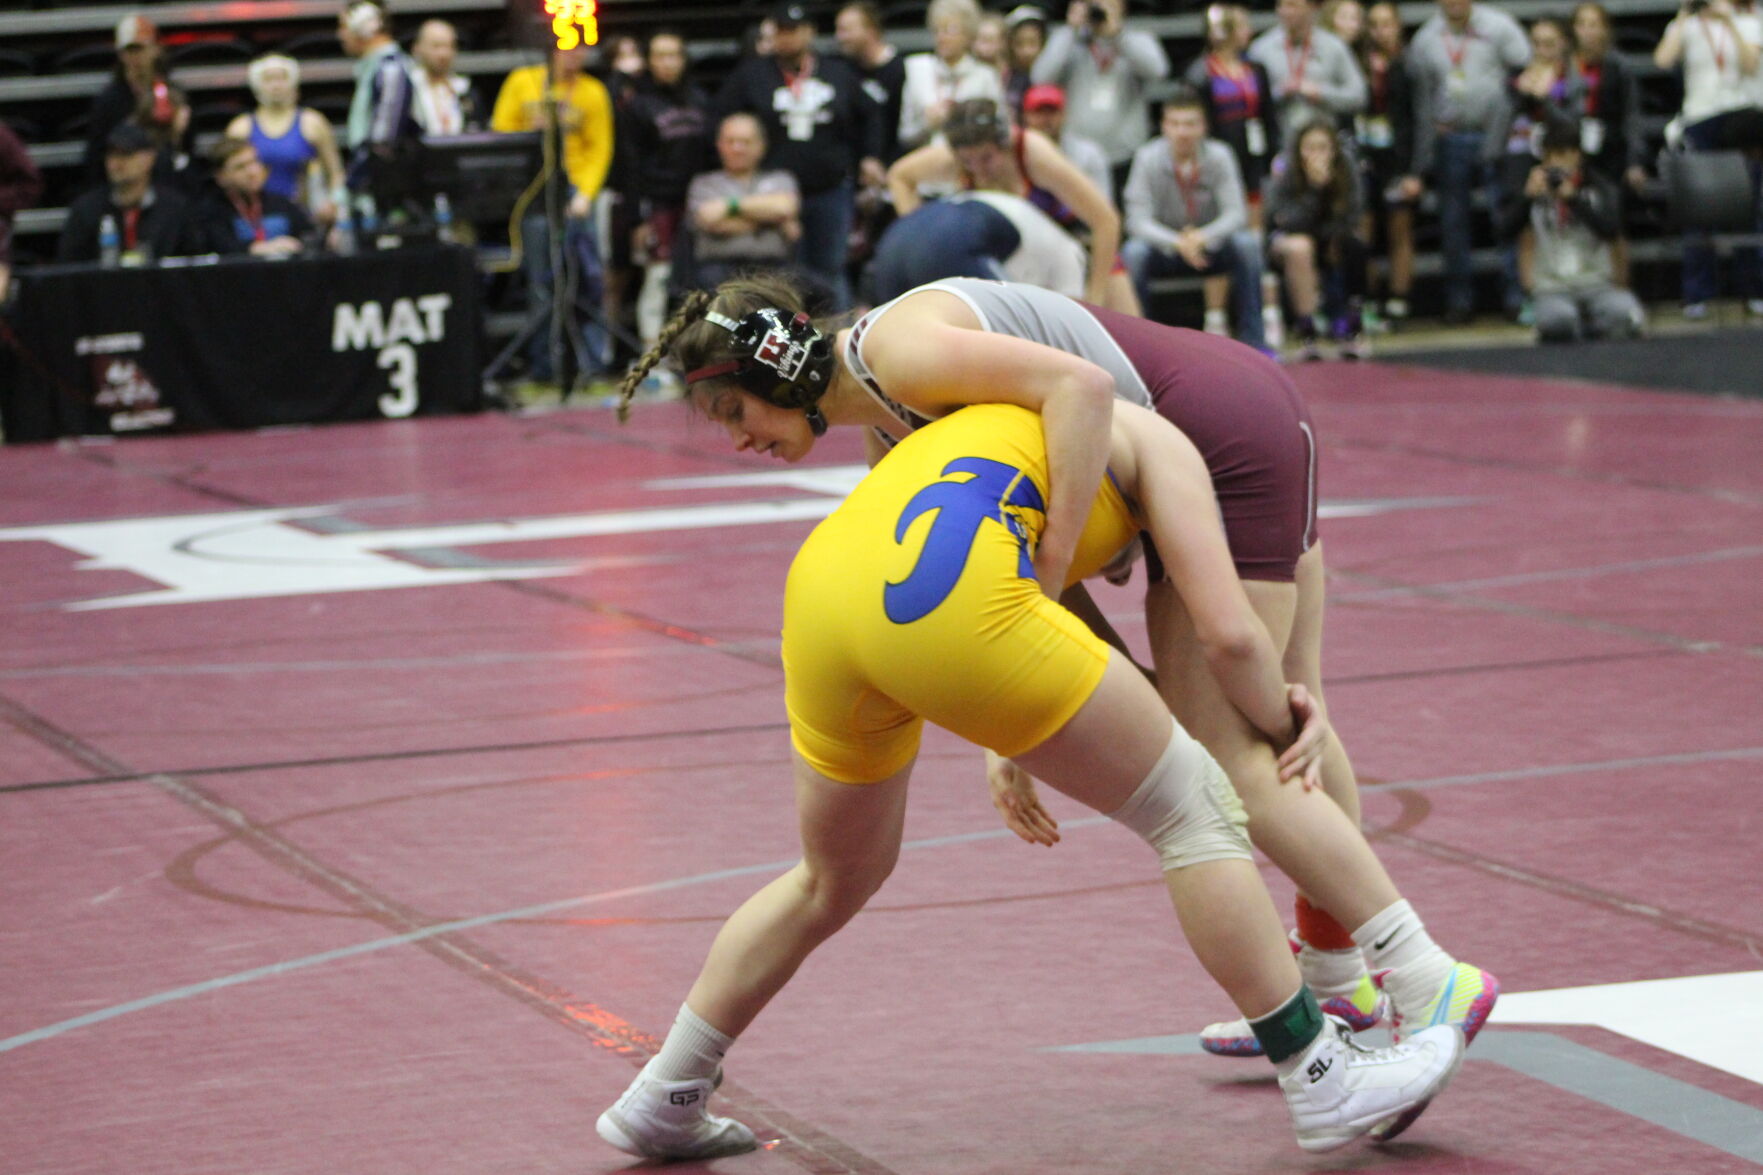 WIAA state wrestling notebook Vetsch leads first group of girls qualifiers pic